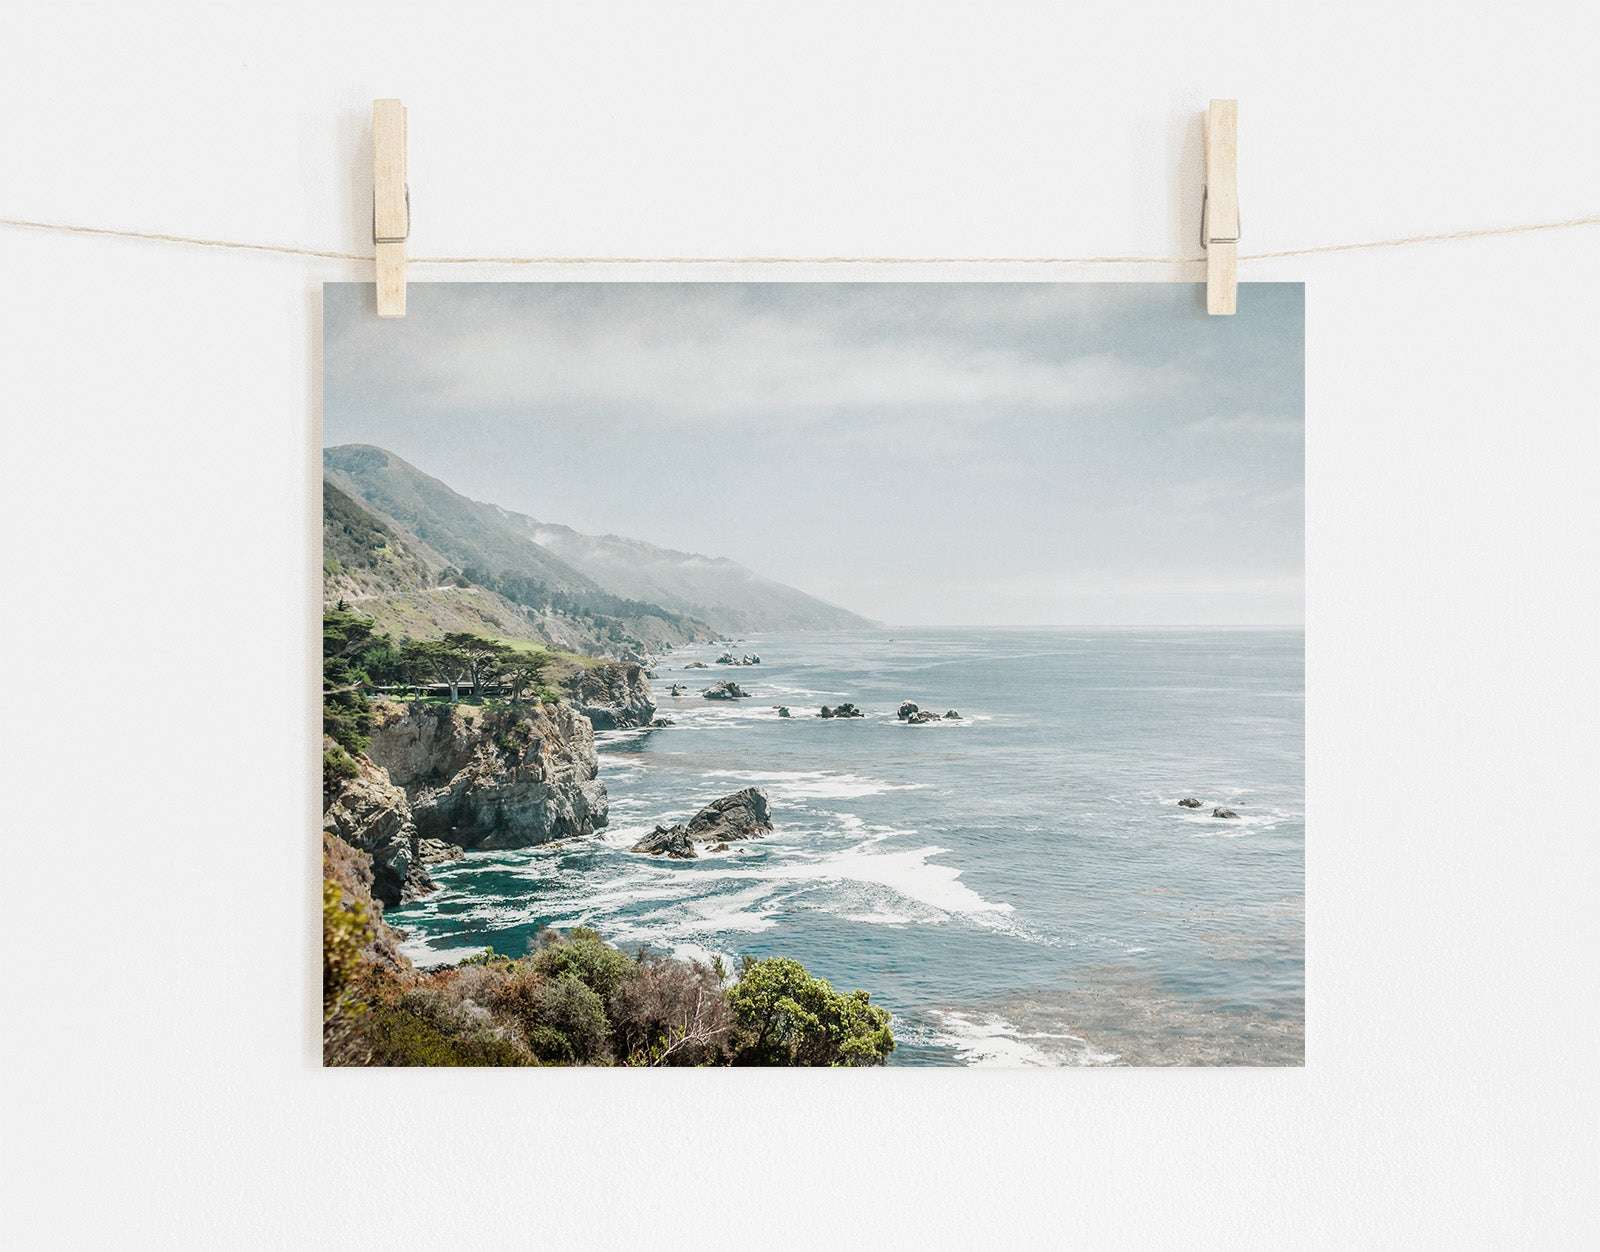 A photo clipped to a line, displaying a scenic view of Offley Green&#39;s &#39;Rocky Rocks&#39; landscape print of Big Sur&#39;s rugged coastline with cliffs and ocean, wrapped in a gentle mist, under a pale sky.